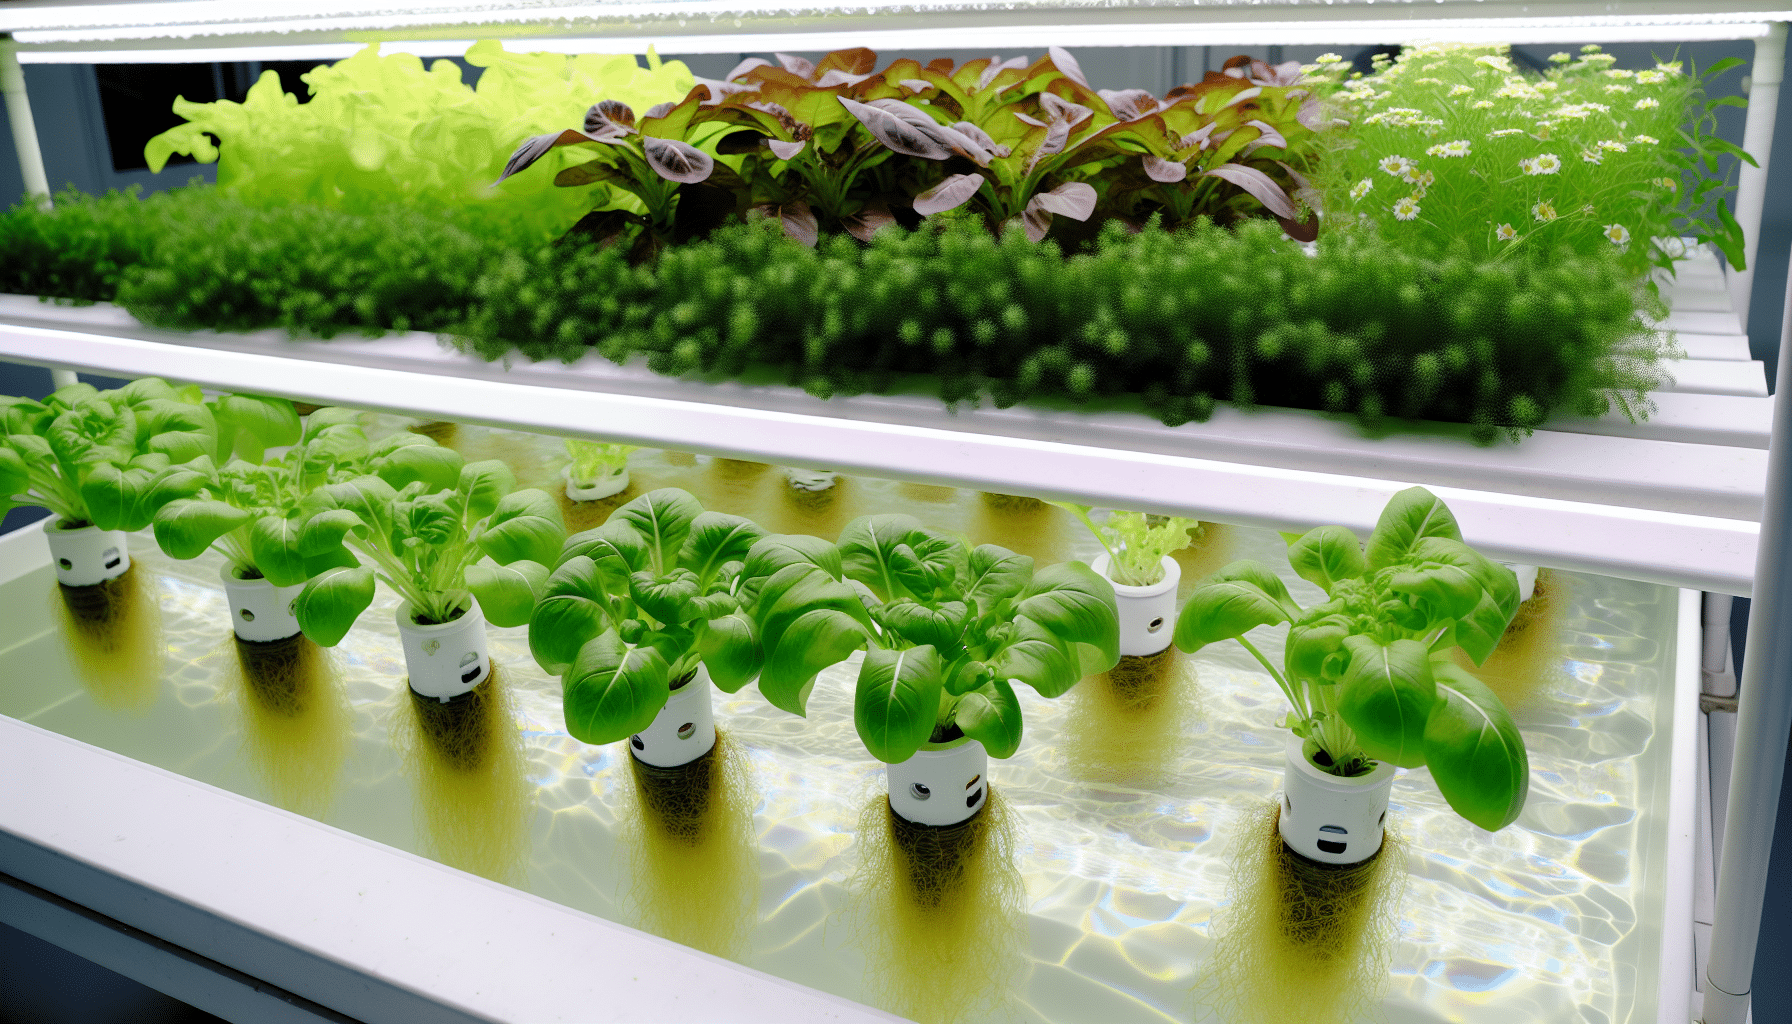 Hydroponic garden with plants growing in nutrient-rich water solution